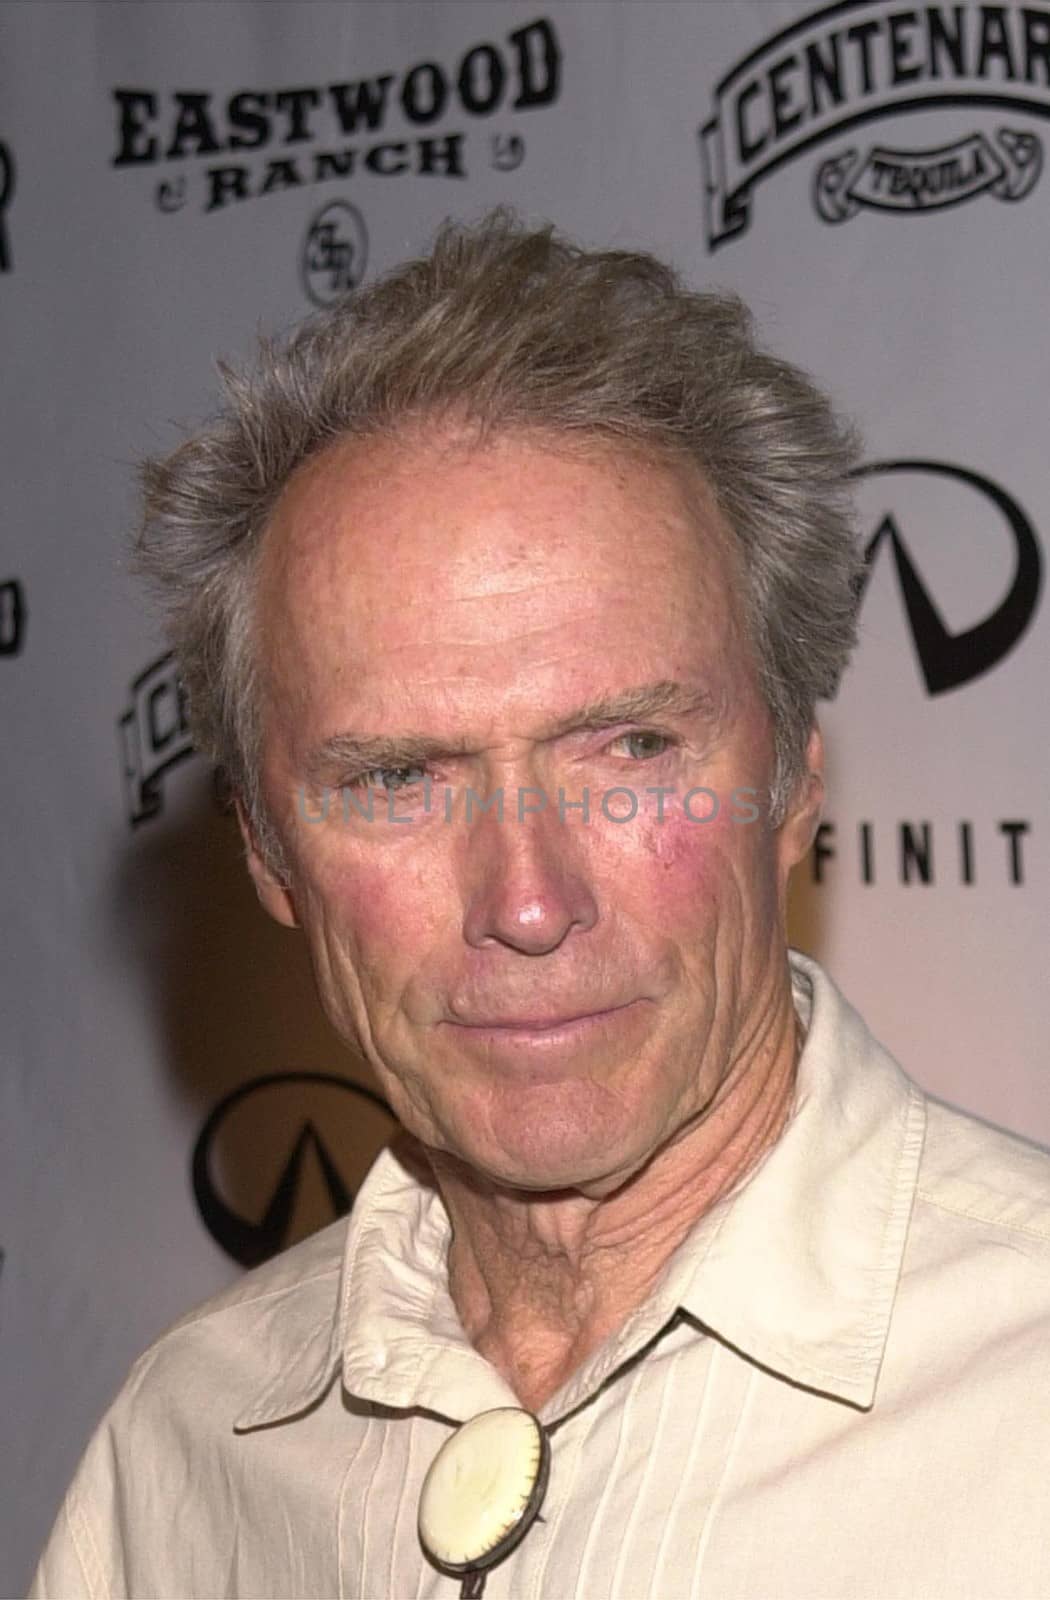 Clint Eastwood at the launch party for Eastwood Ranch's new lifestyle brand with "Denim Tapas and Tequila" held at Chadwick, Beverly Hills, CA 07-16-02